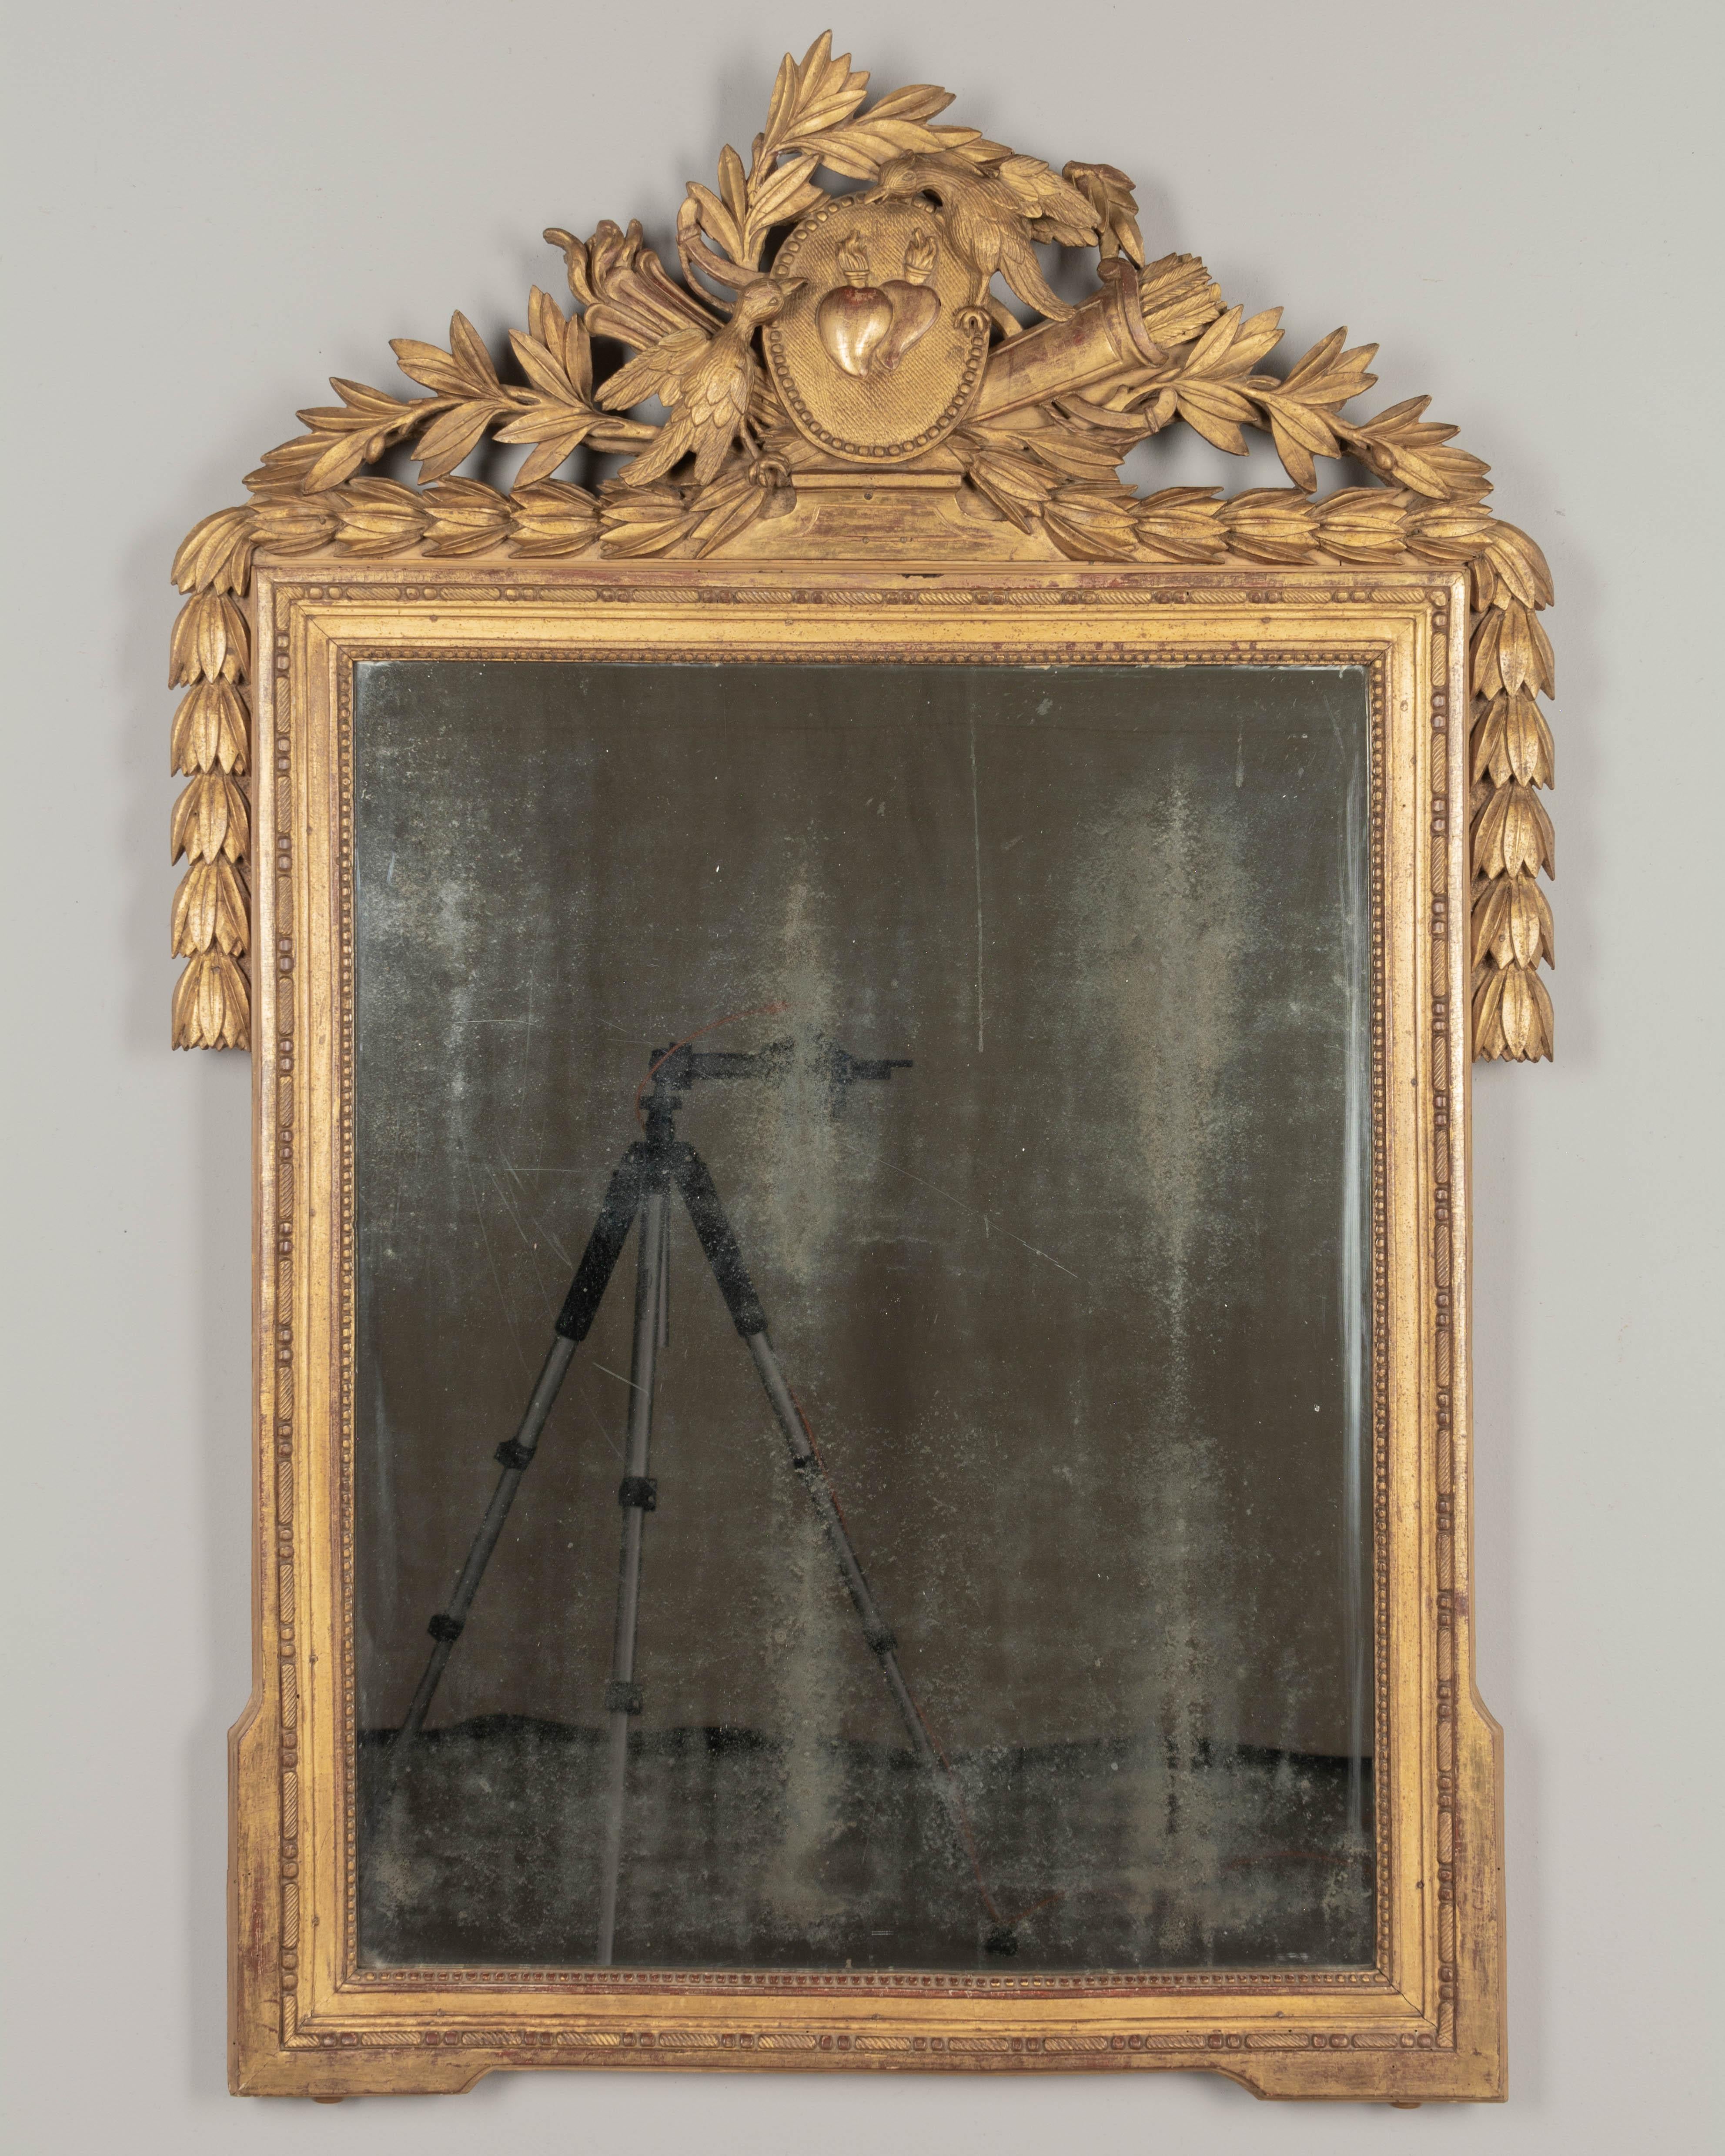 An 18th century Louis XVI French Provençal giltwood bridal mirror. Beautifully carved three dimensional crest with a pair of lovebirds, an oval plaque with flaming hearts and a quiver of arrows. Laurel garlands drape down the sides. Retaining a pale